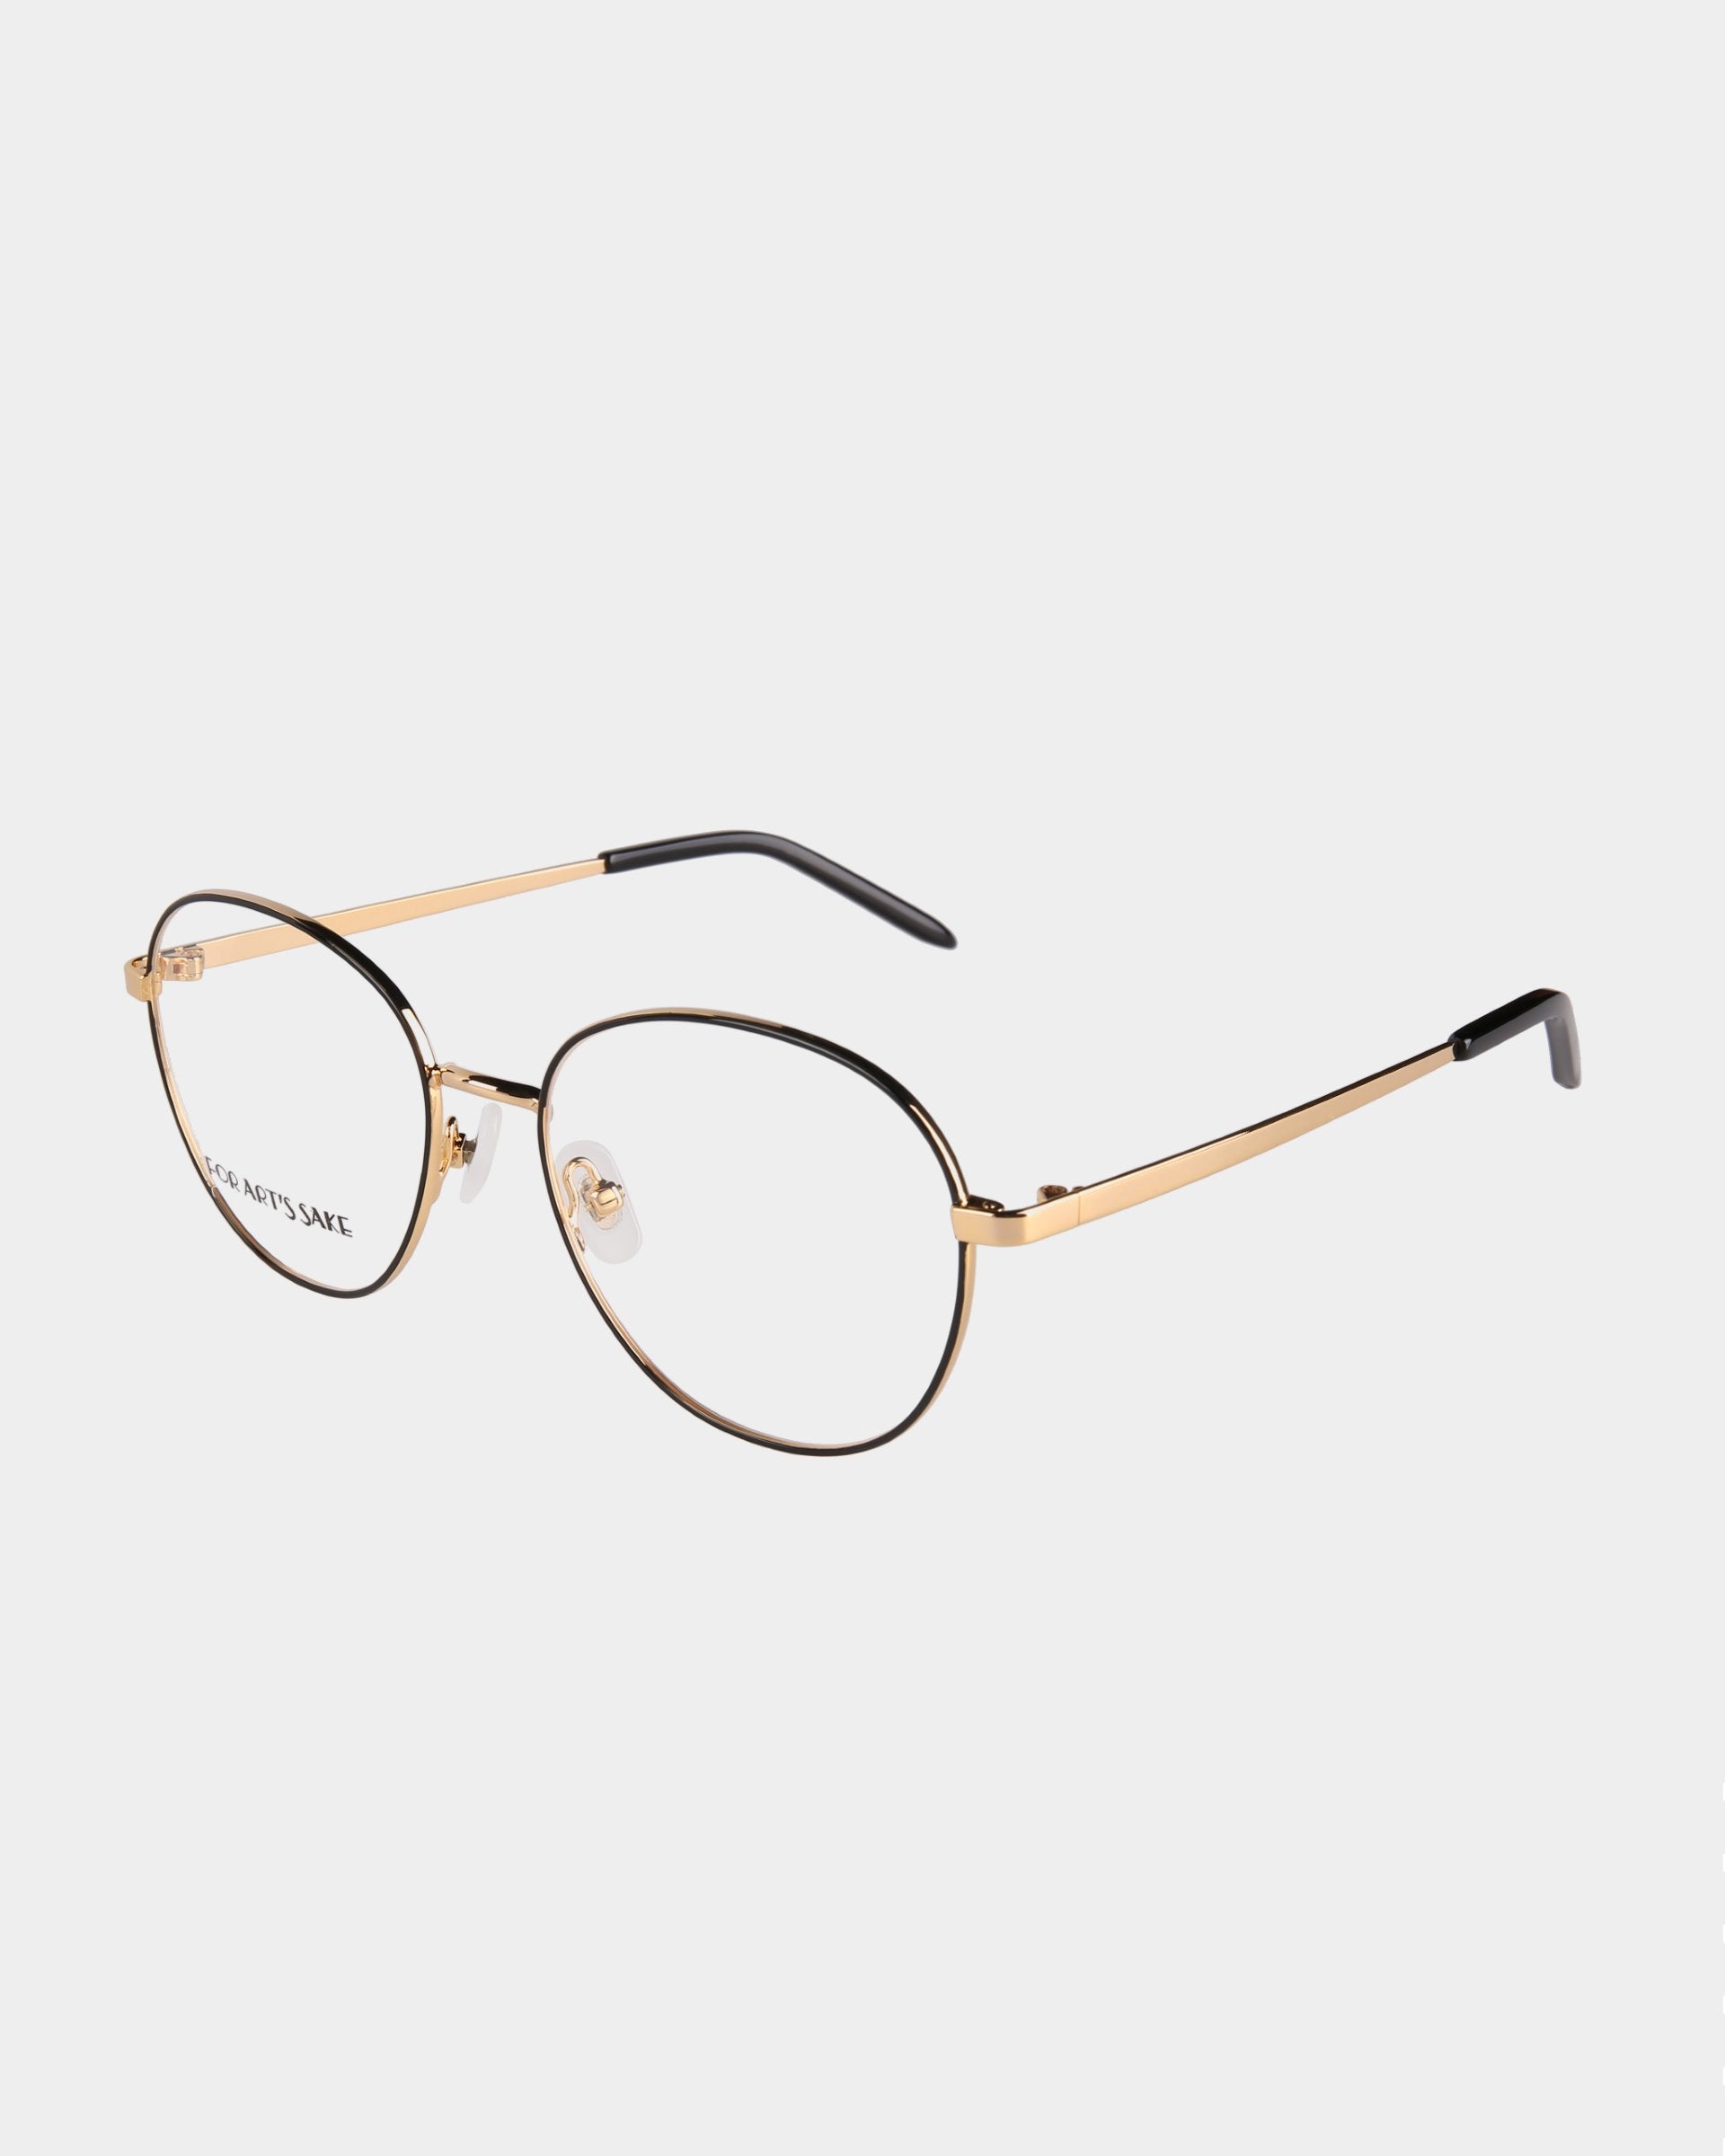 A pair of stylish eyeglasses with thin gold-toned metal frames, black detailing on the top rim, and black temple tips. The lenses are round with a slightly geometric shape and feature adjustable nose pads. "Hailey" by For Art's Sake® is partially visible on the left lens. The background is white.